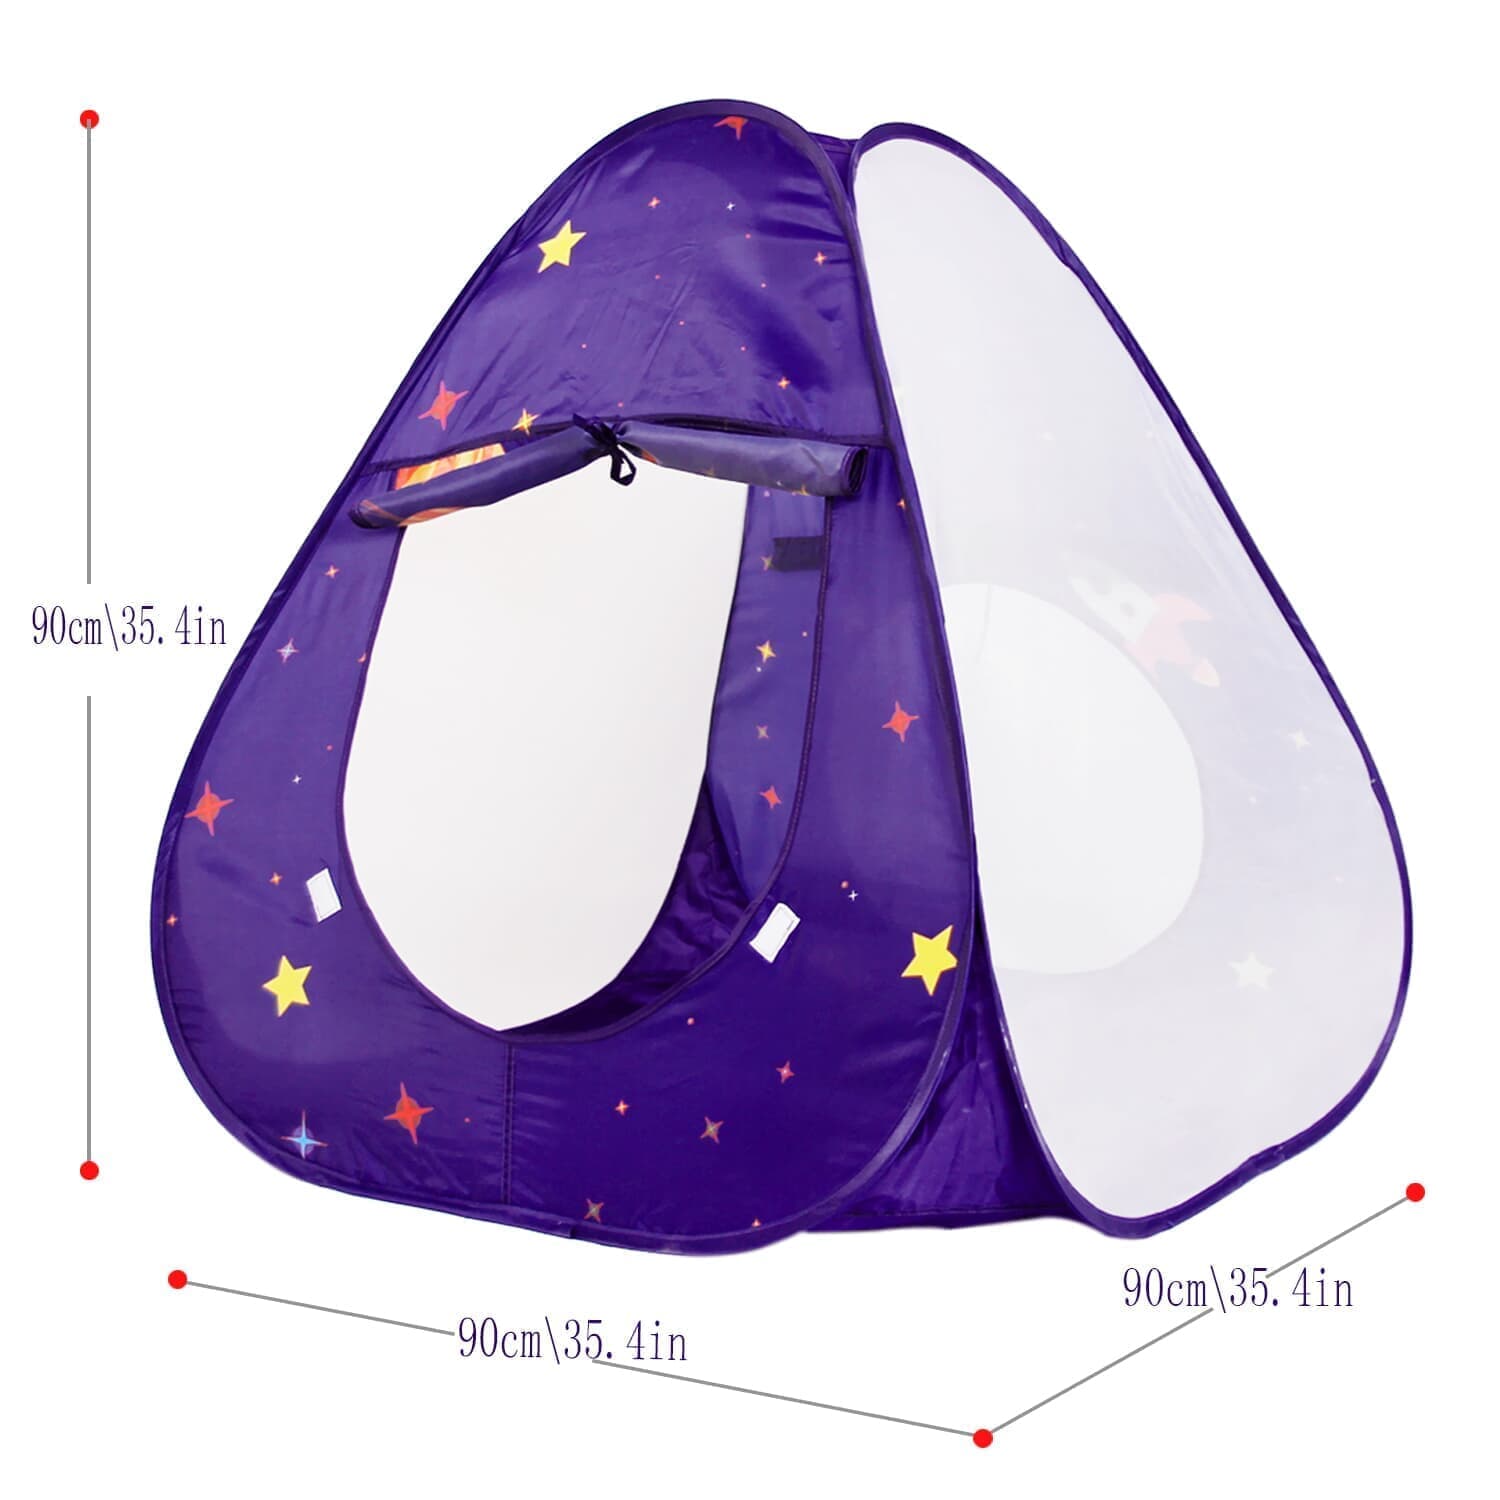 Homfu Kids Indoor And Outdoor Playhouse Princess Prince Castle Children Play Tent And Portable Toy Tent For Boys Girls  Homfu Kids Indoor And Outdoor Playhouse Princess Prince Castle Children Play Tent And Portable Toy Tent For Boys Girls Fun Plays Children Play Tent,kids play tent,outdoor indooor playhouse,3 in 1 pop up kids play tent